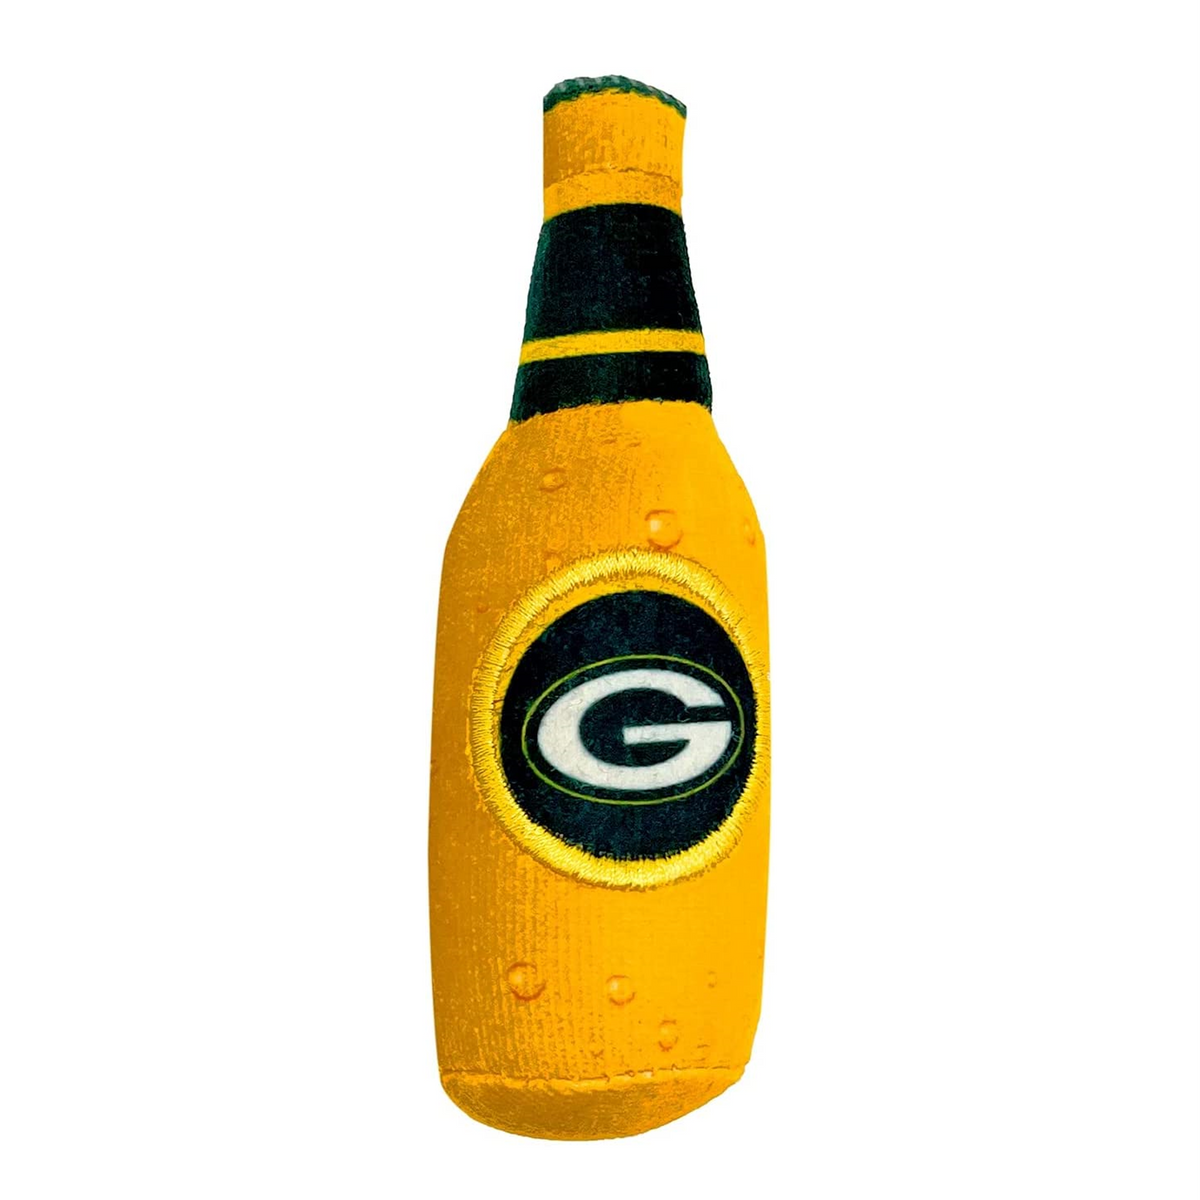 Green Bay Packers 3 piece Catnip Toy Set - 3 Red Rovers